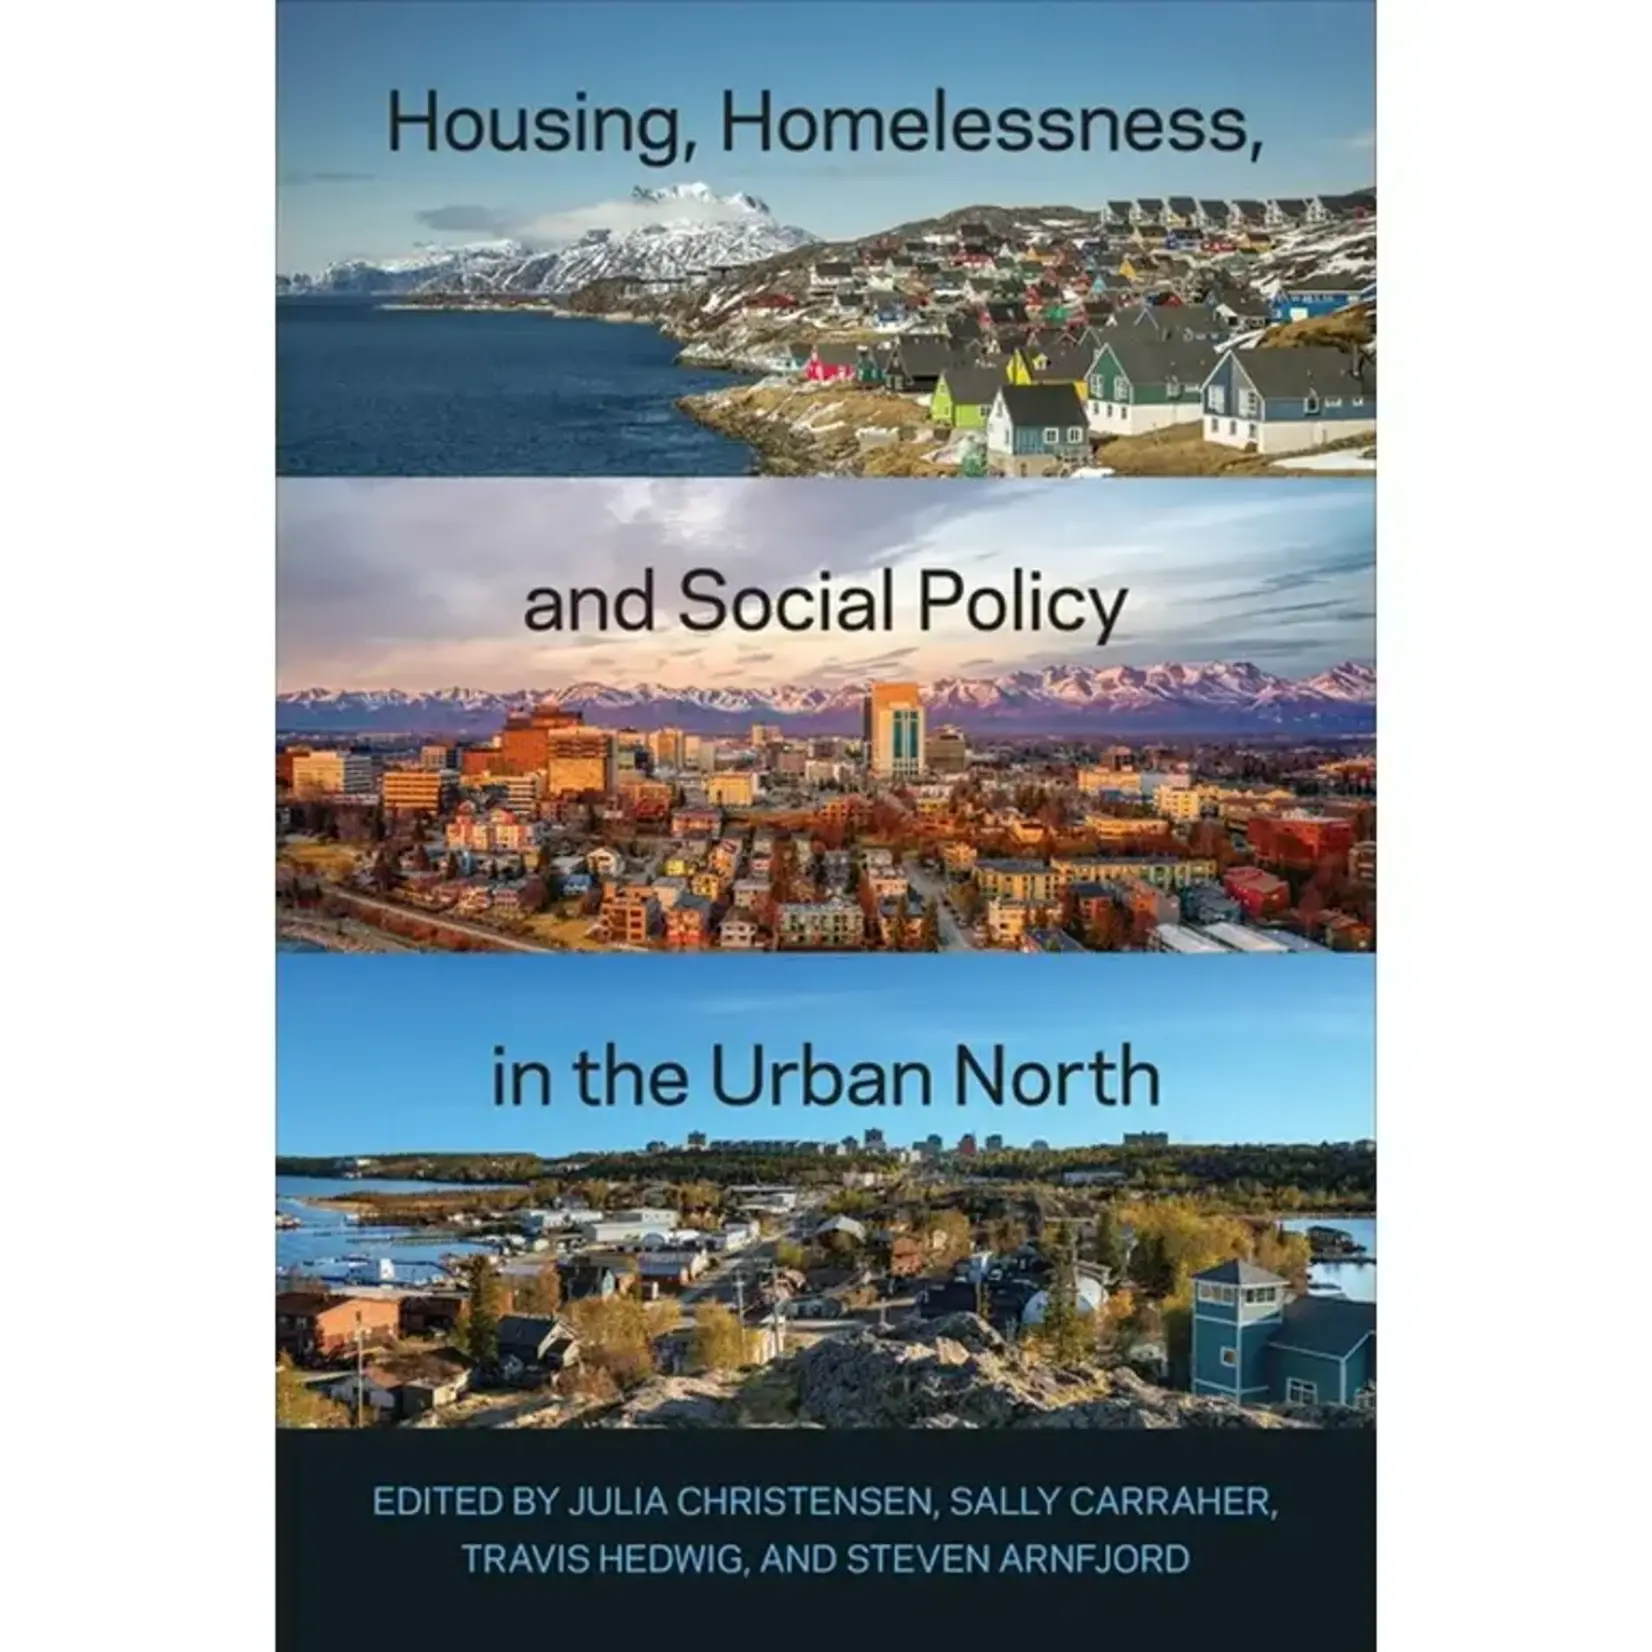 Housing, Homelessness and Social Policy in the Urban North